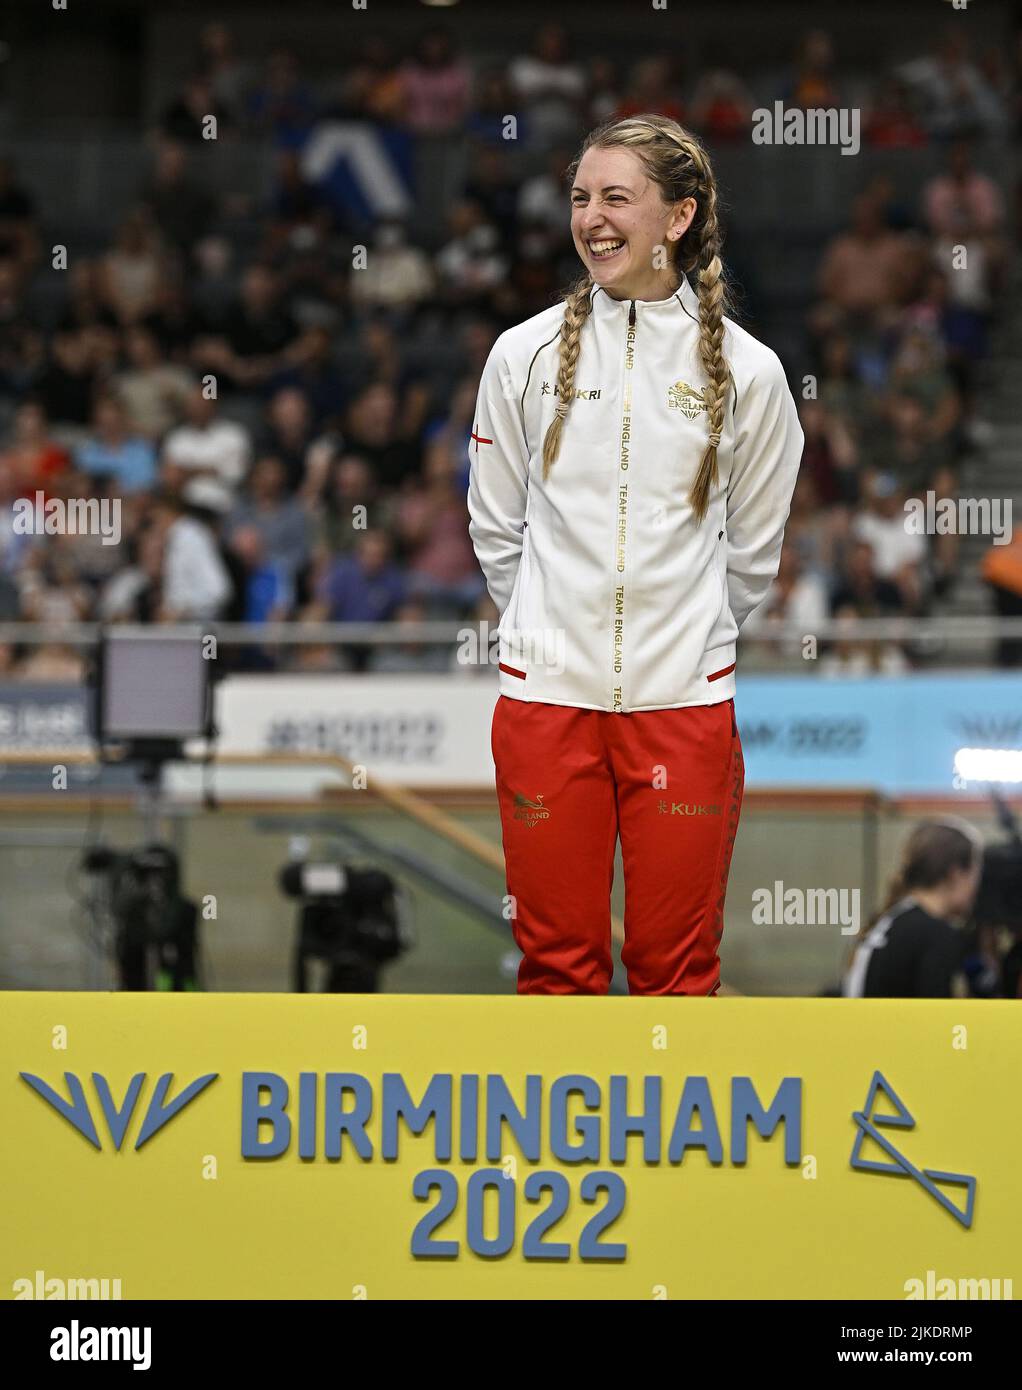 Stratford, United Kingdom. 01st Aug, 2022. Commonwealth Games Track Cycling. Olympic Velodrome. Stratford. Laura Kenny (ENG) laughs just before she steps onto the podium to get her Gold medal during the Womens 10km Scratch race Credit: Sport In Pictures/Alamy Live News Stock Photo